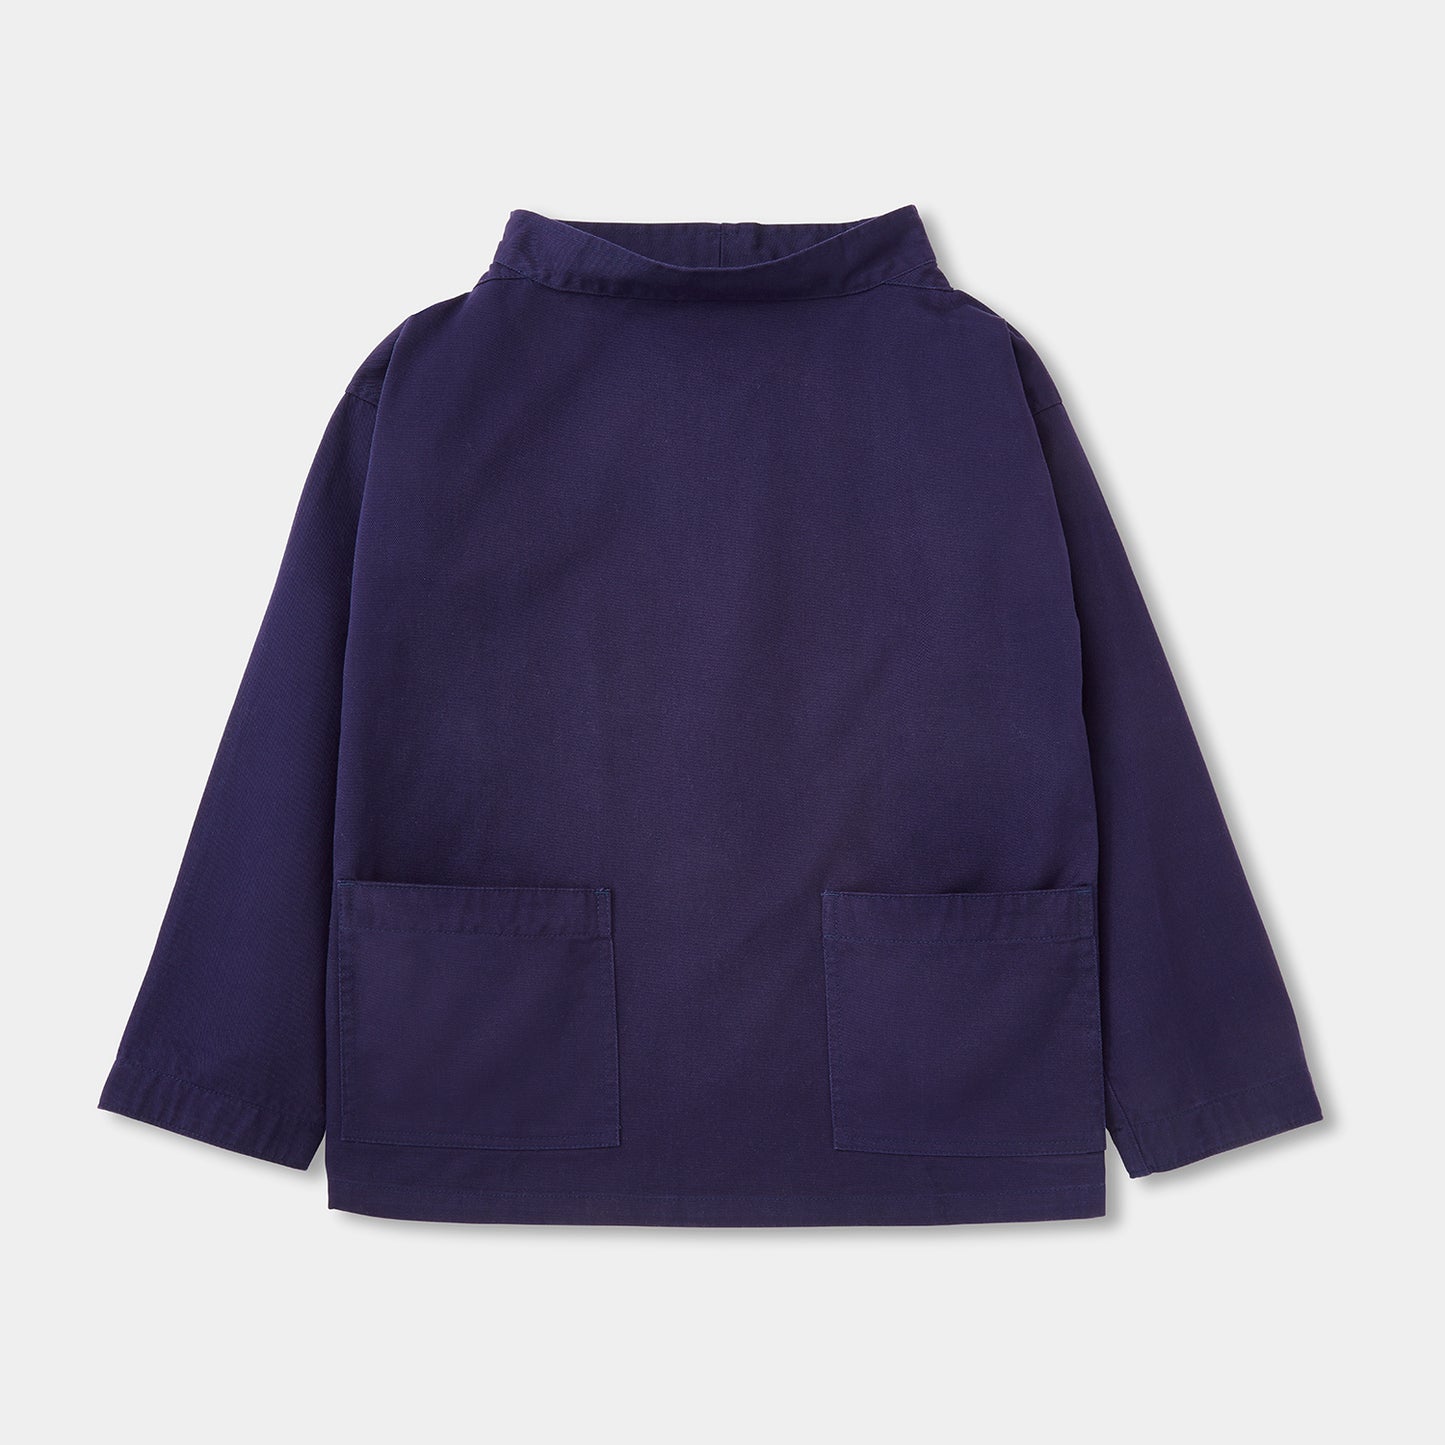 The Classic Smock for gardeners